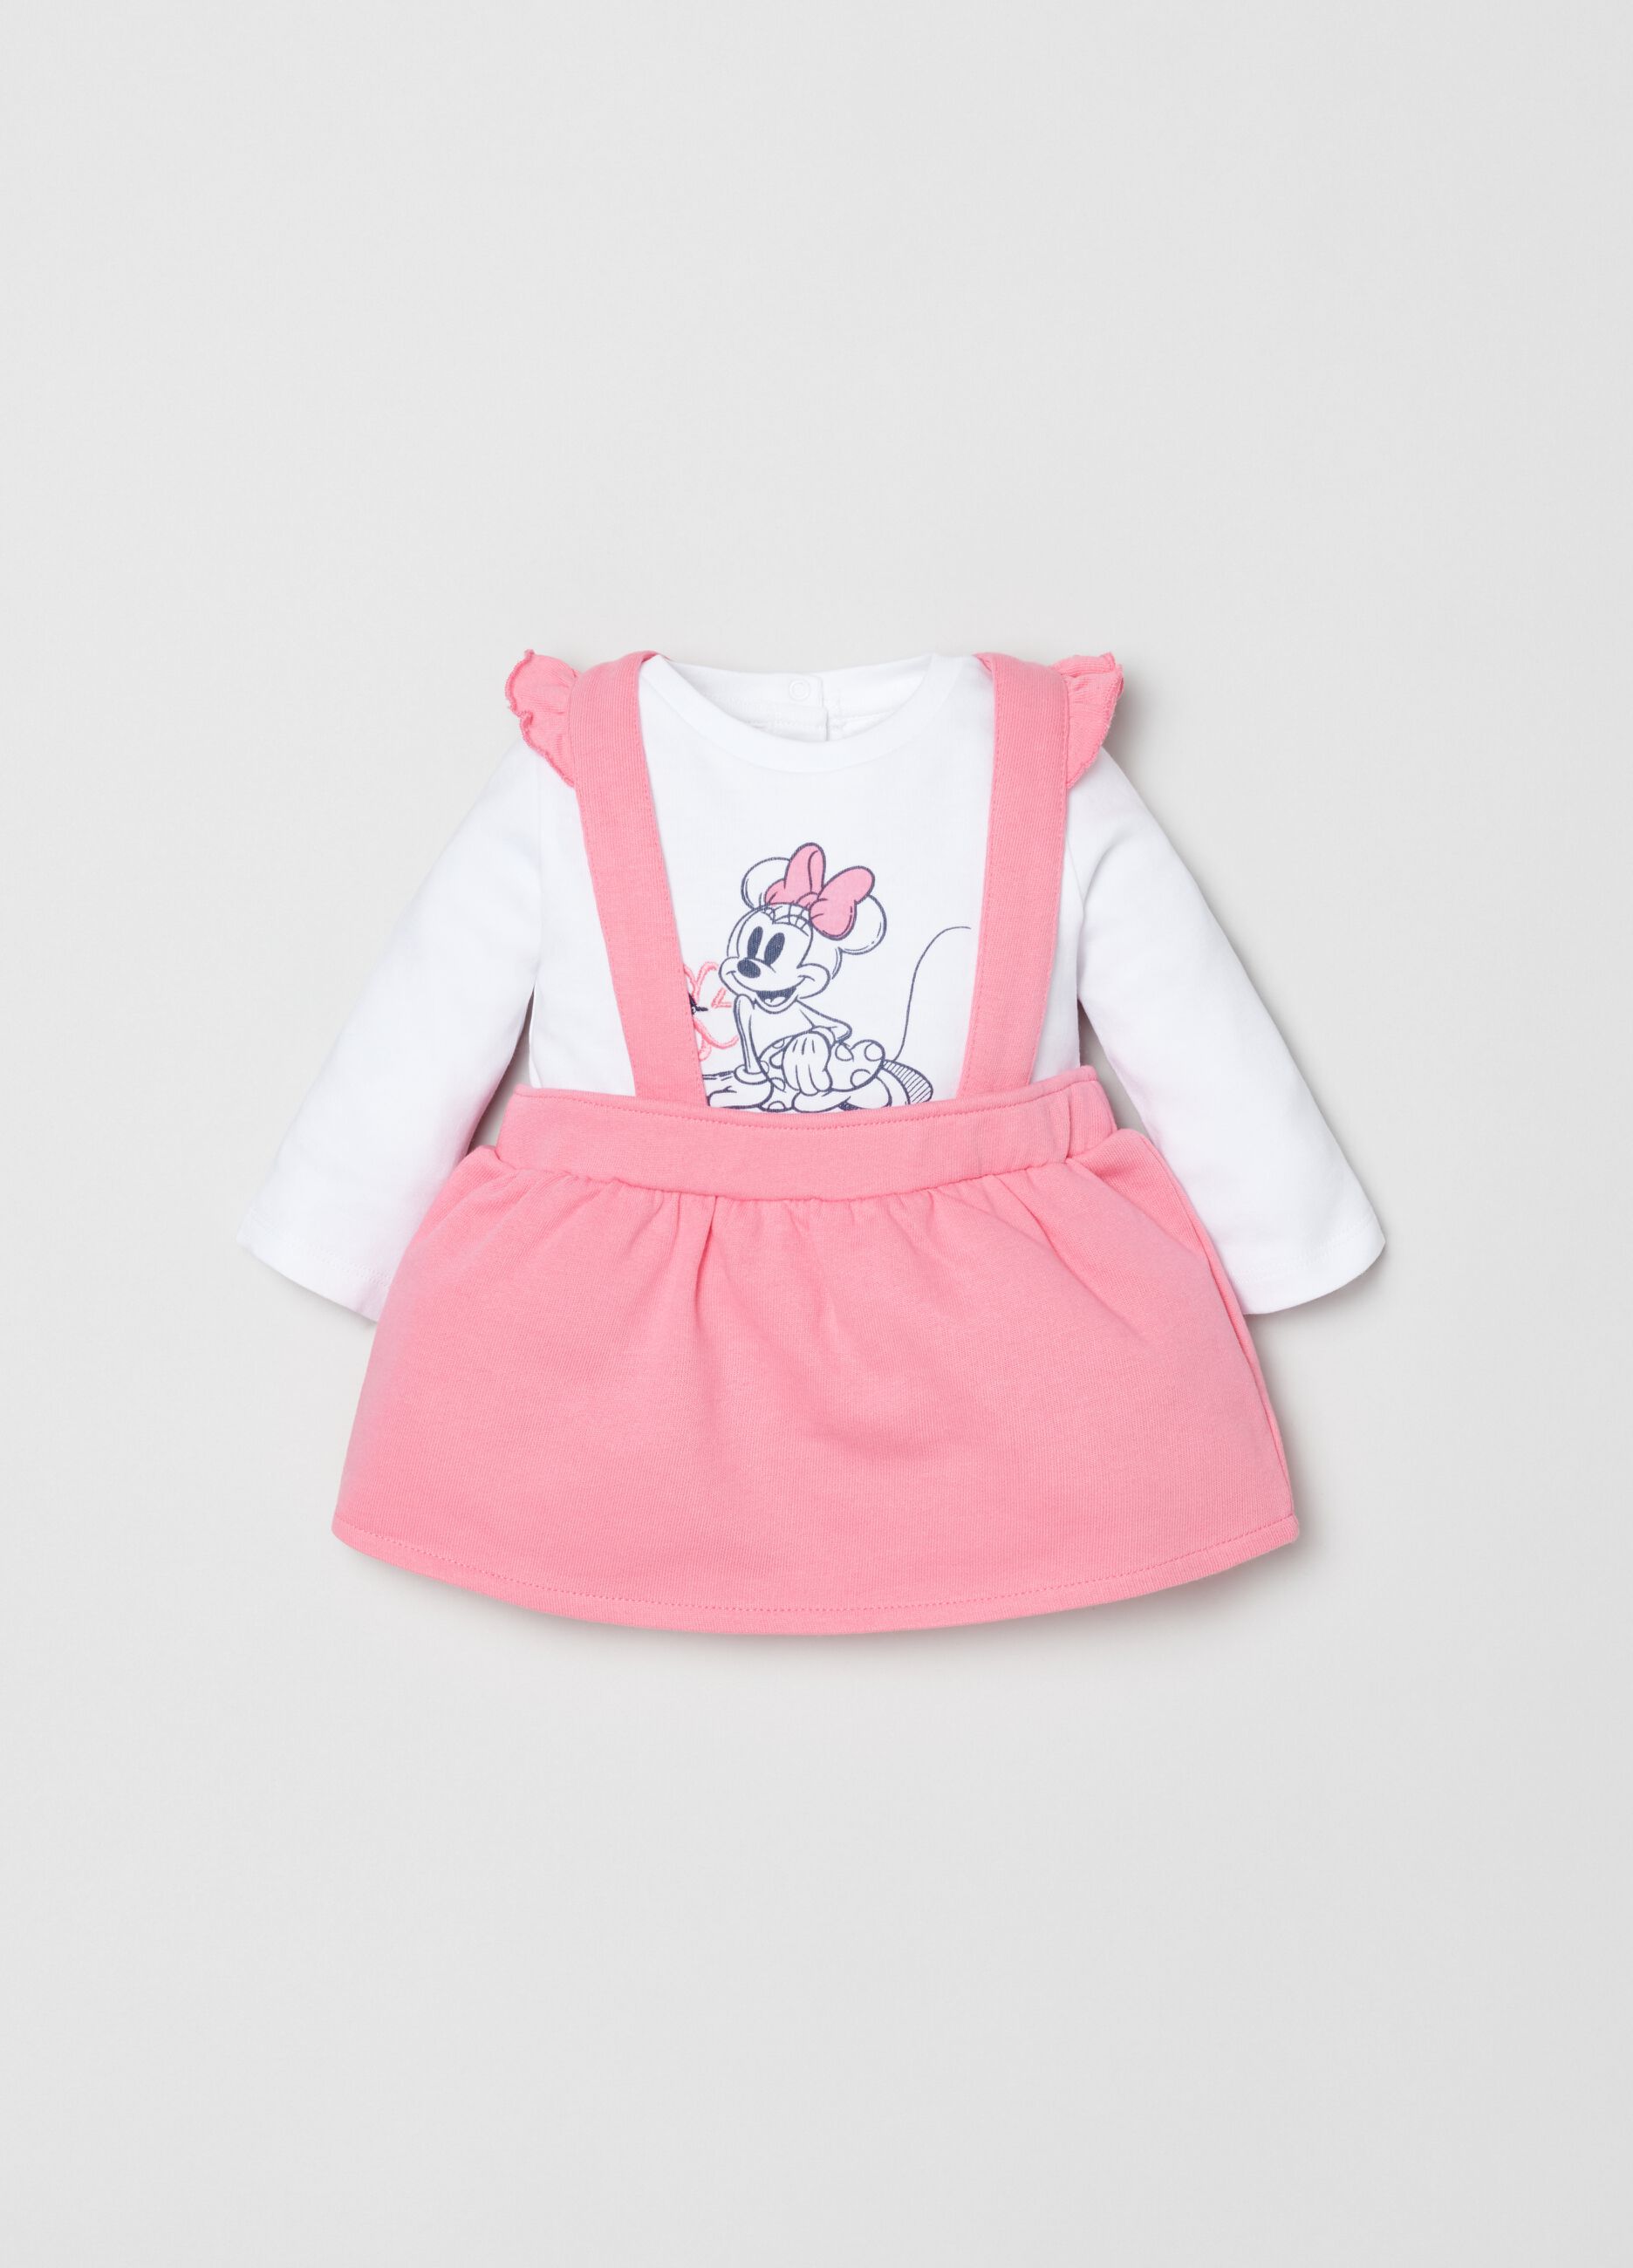 Disney Baby Minnie Mouse T-shirt and dress set